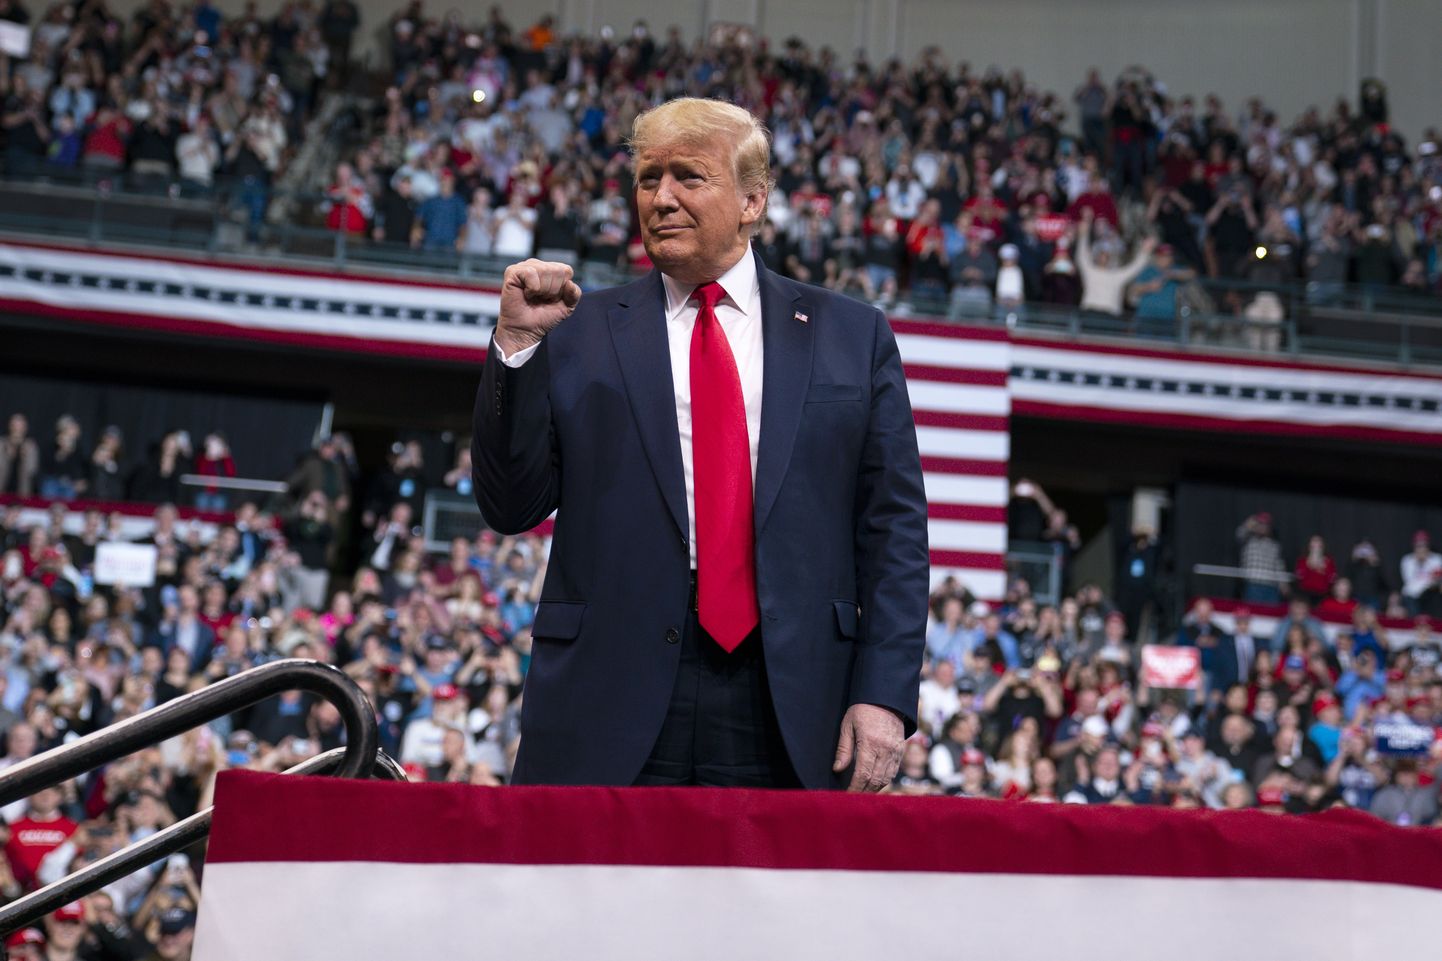 President Donald Trump arrives at SNHU Arena for a campaign rally, Monday, Feb. 10, 2020, in Manchester, N.H. (AP Photo/Evan Vucci)